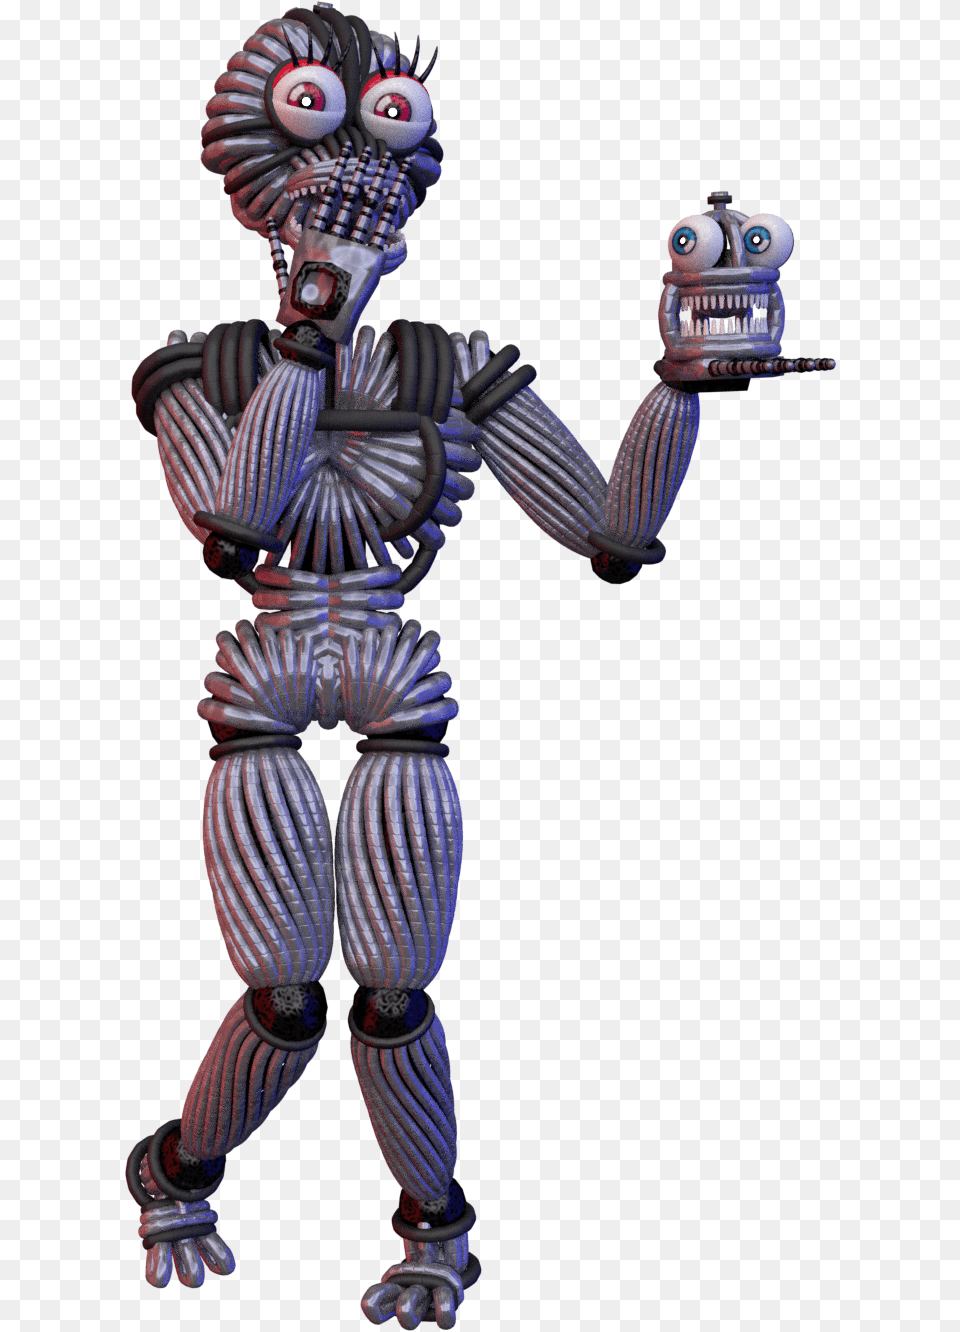 Fnaf Funtime Chica Endo Fnaf Funtime Chica Endo, Robot, Person Png Image